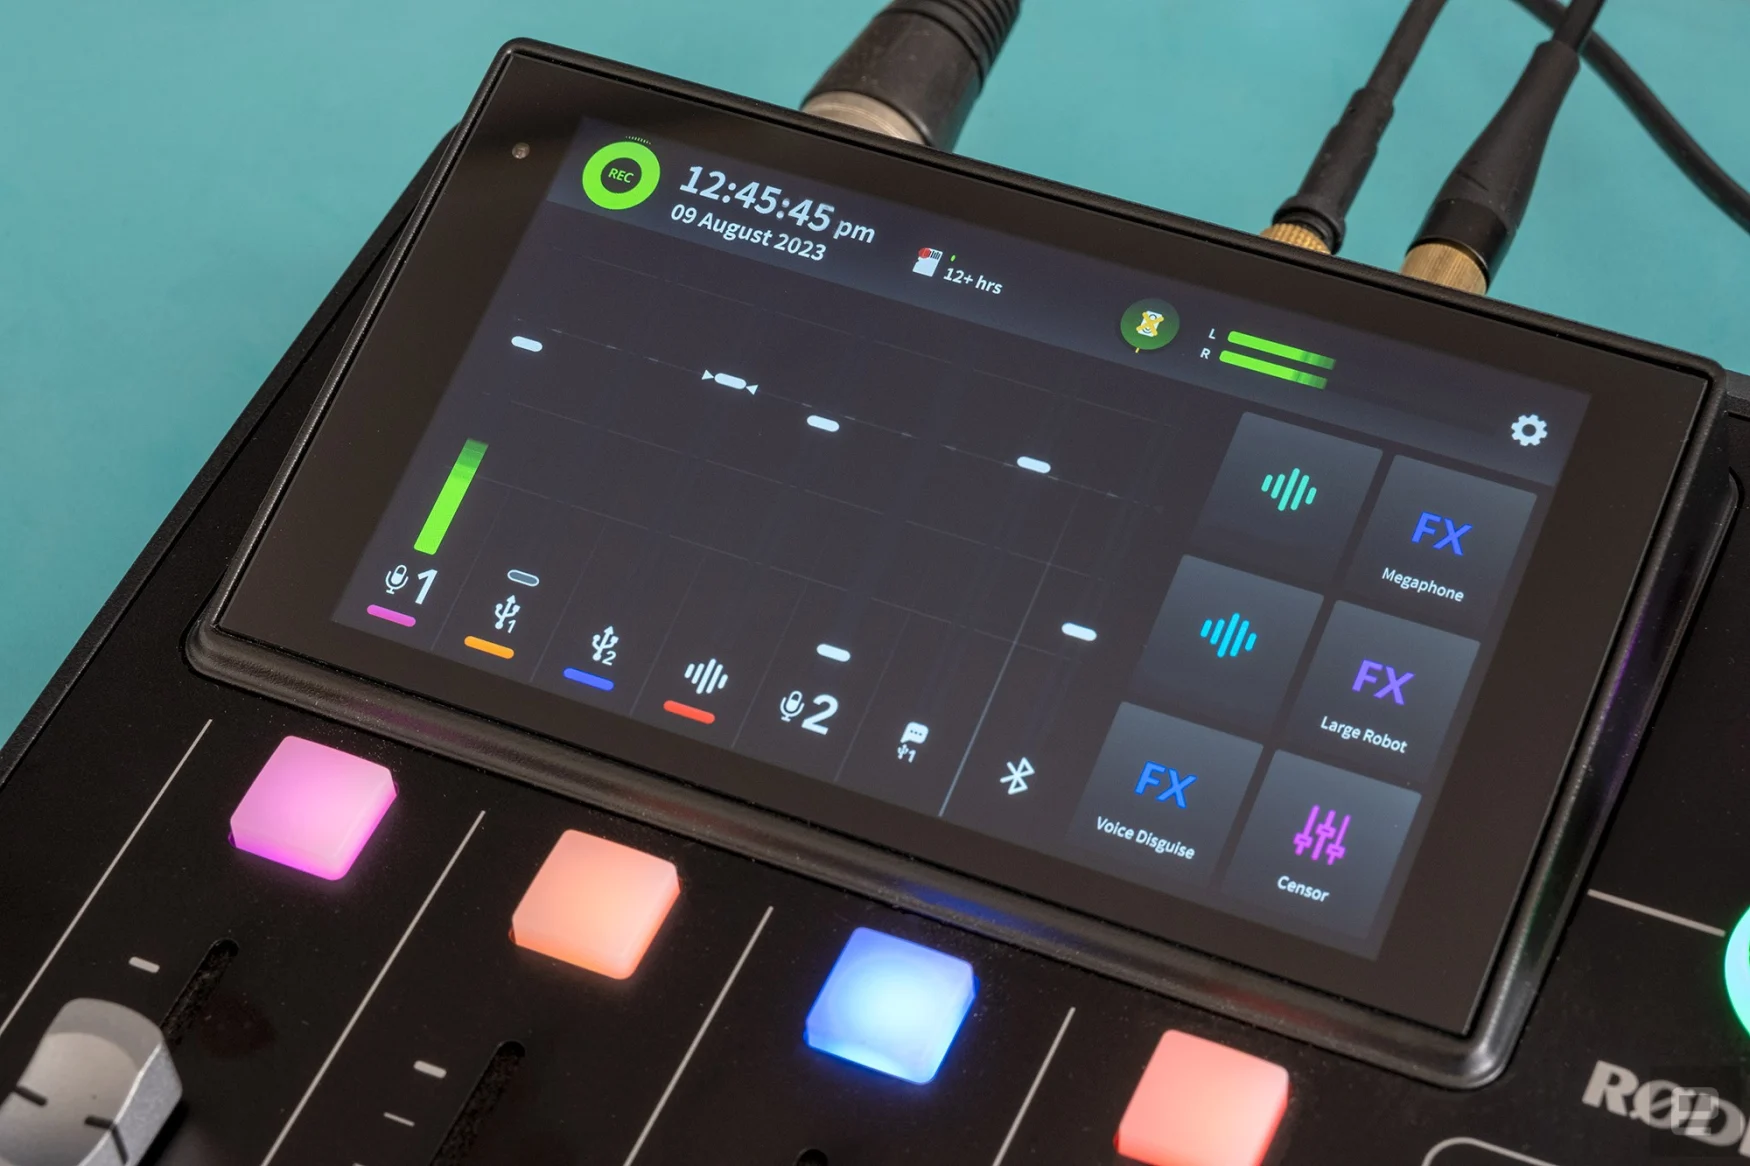 The Rodecaster Duo's touchscreen display showing the mixer levels.